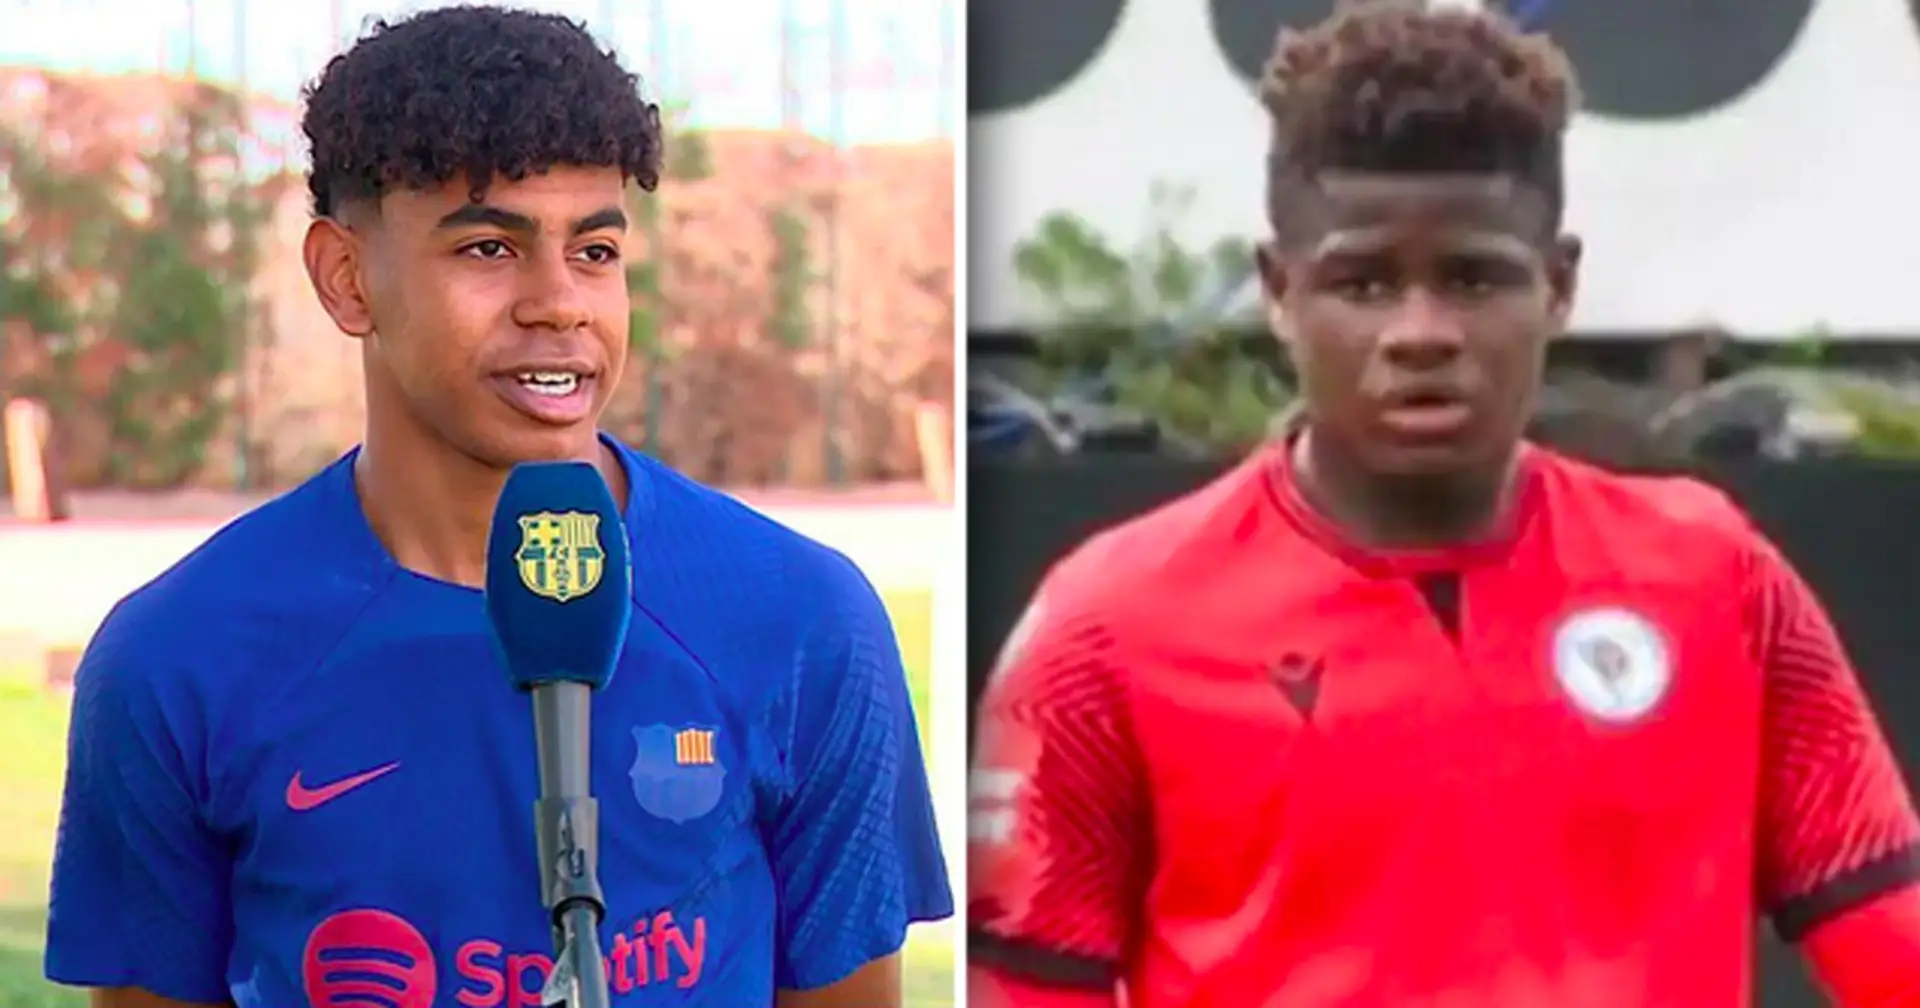 Barca reportedly will include 4 youngsters in pre-season squad, one is a new signing